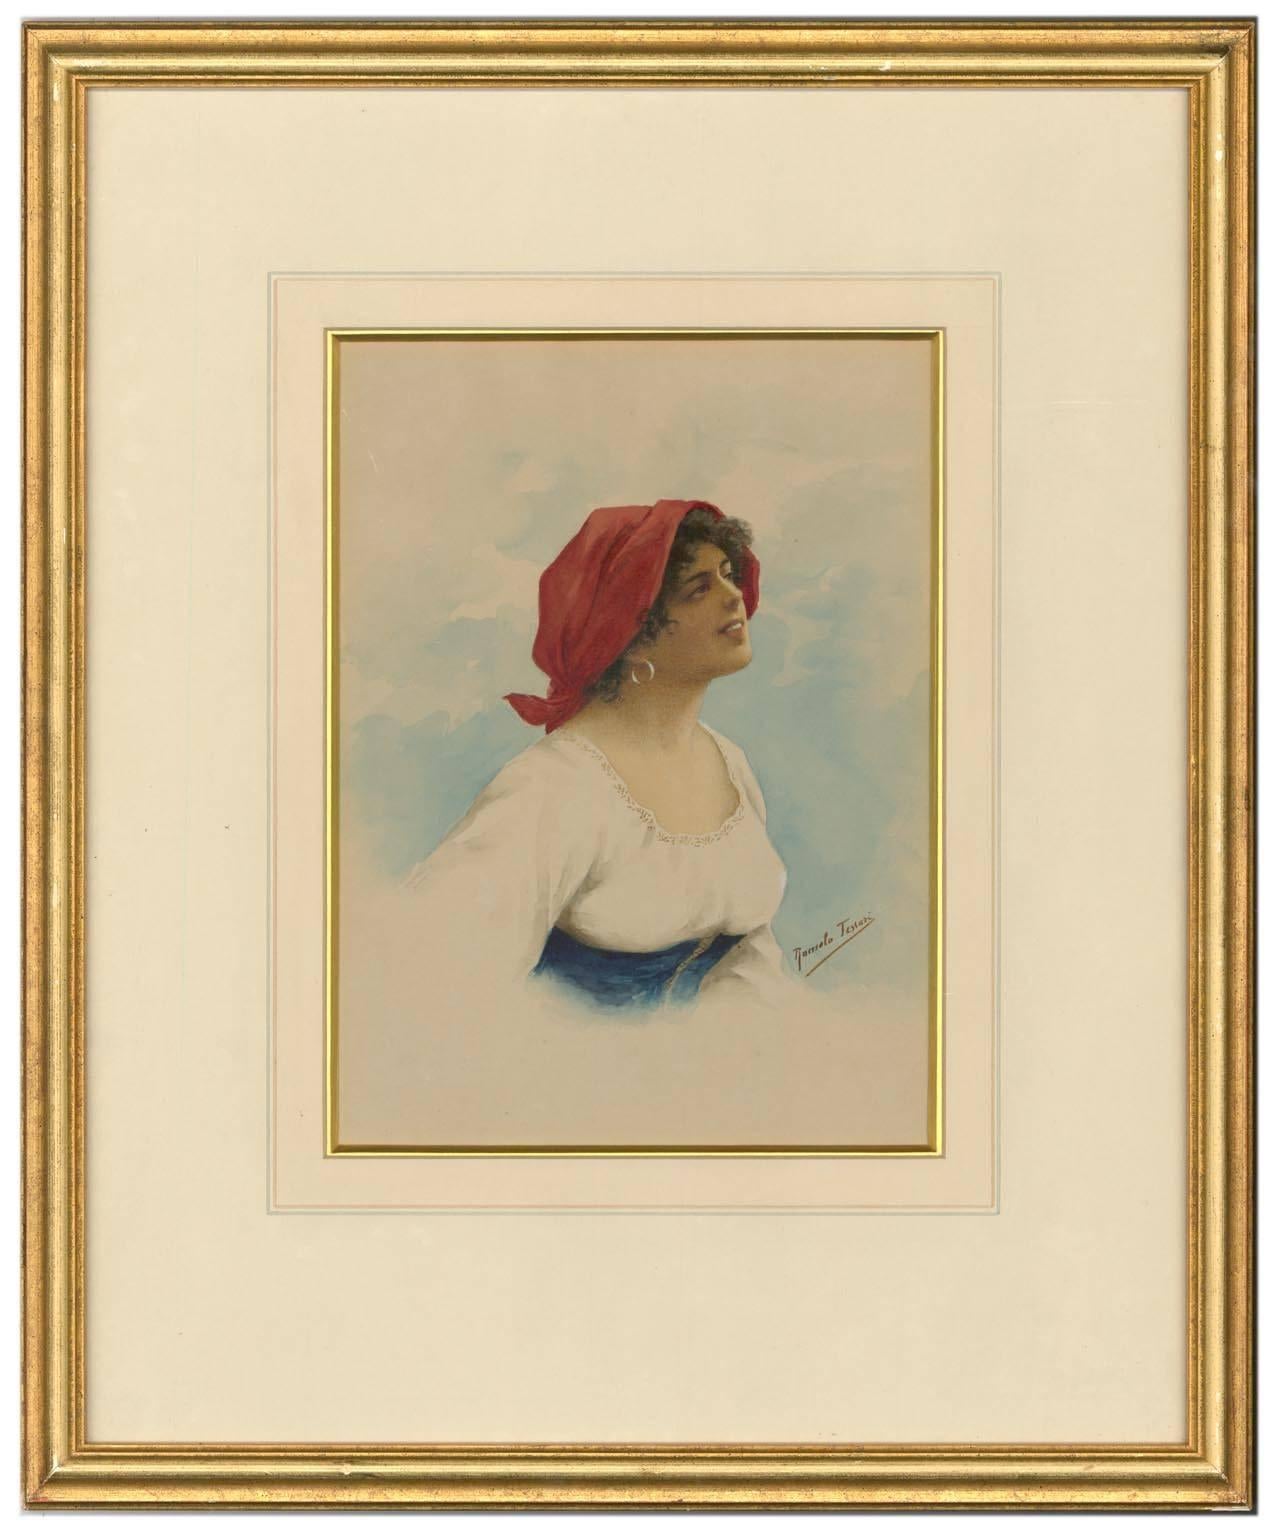 A very fine signed watercolour portrait by the well listed Italian artist Romolo Tessari (1868-1947). Presented in a washline mount and gilt frame. Signed in the lower right quadrant, painted on wove paper.

Image size: 26 x 19.5cm (10.2" x 7.7")